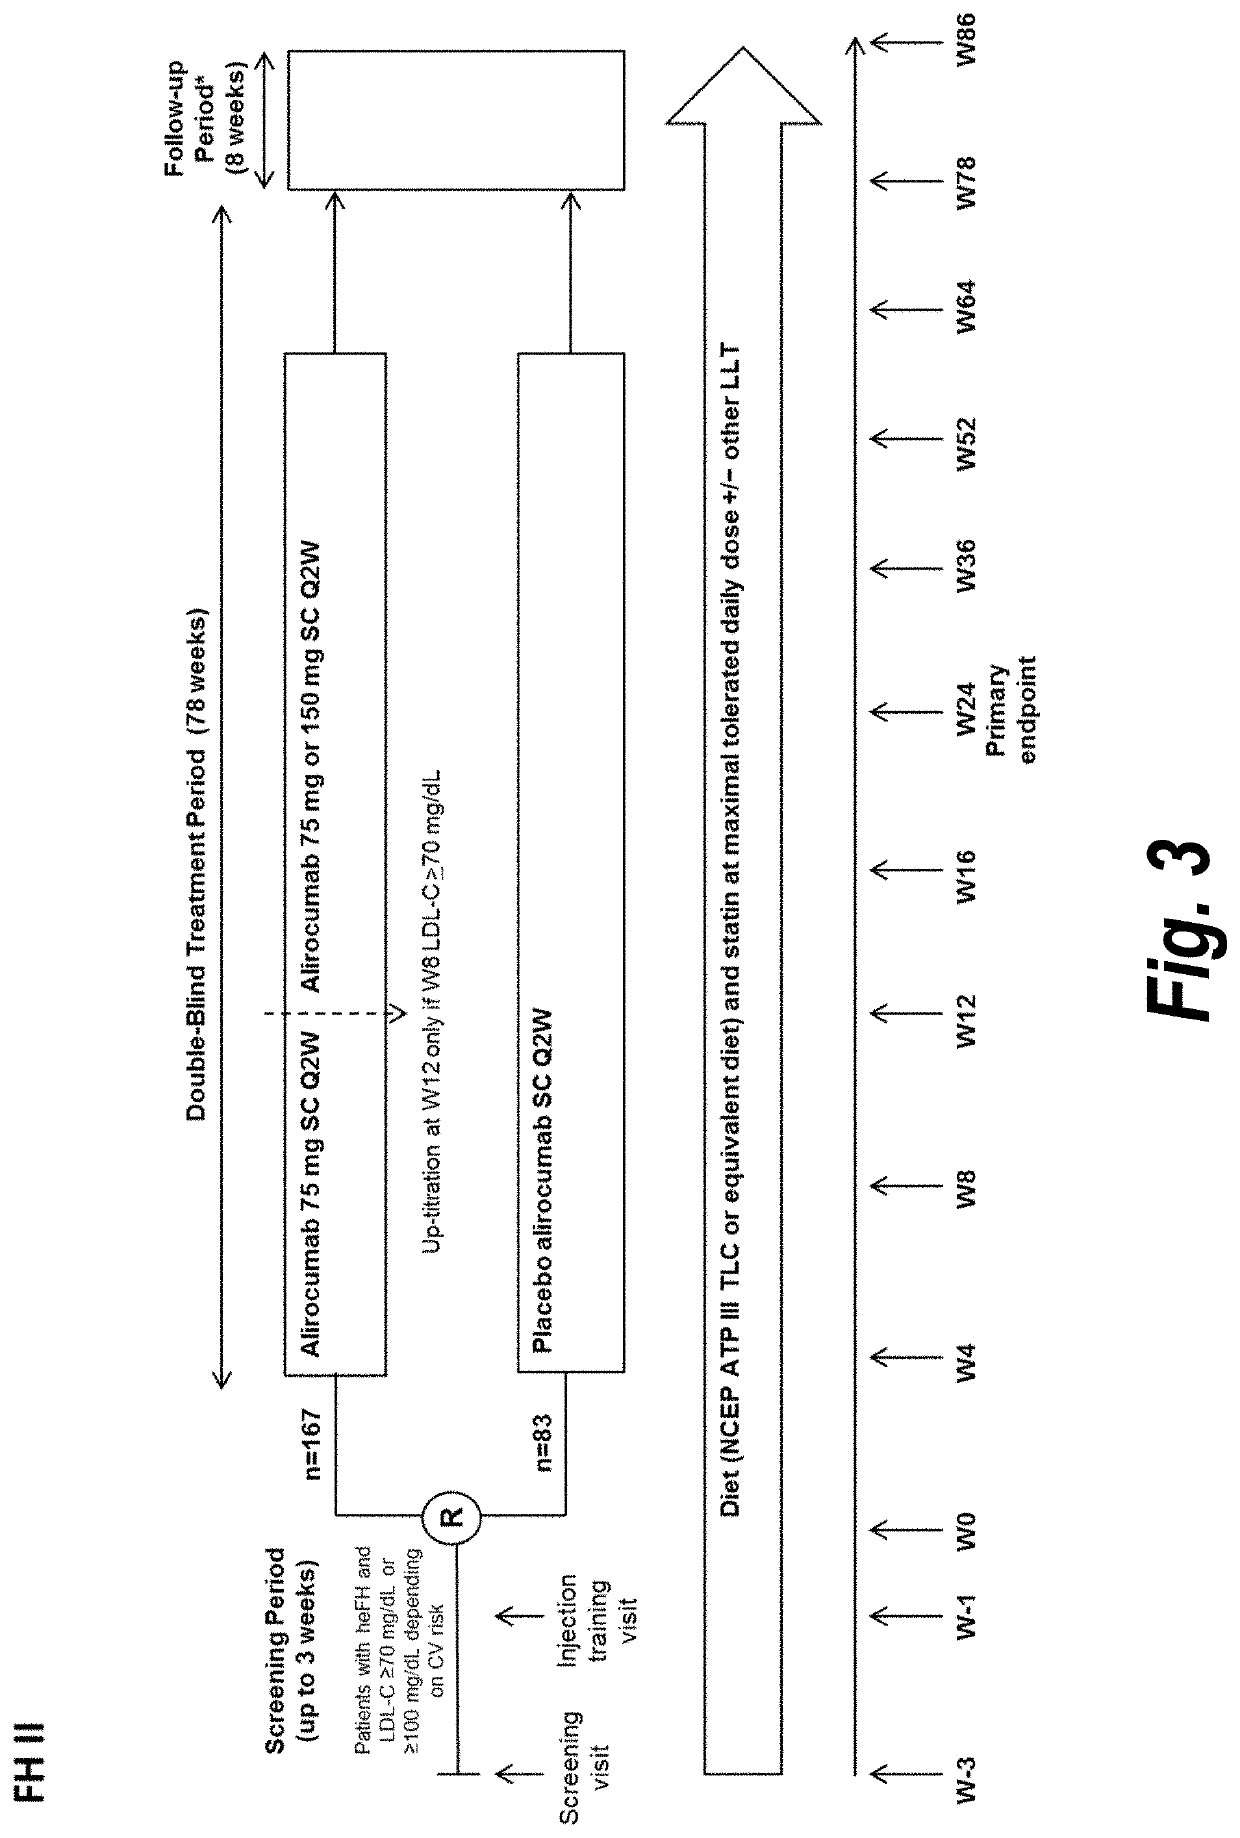 Methods for treating patients with heterozygous familial hypercholesterolemia (heFH) with an anti-PCSK9 antibody